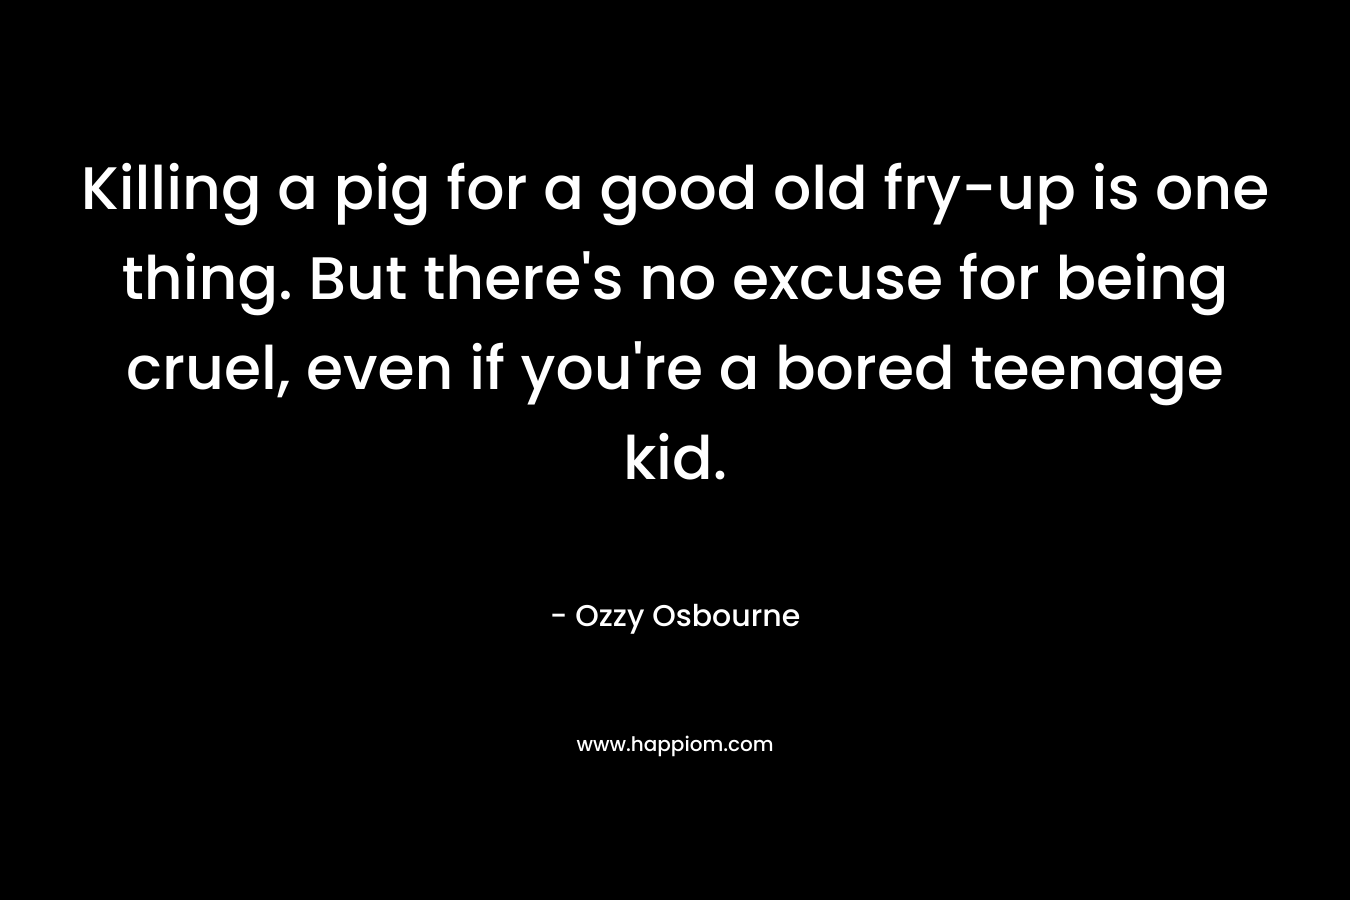 Killing a pig for a good old fry-up is one thing. But there’s no excuse for being cruel, even if you’re a bored teenage kid. – Ozzy Osbourne